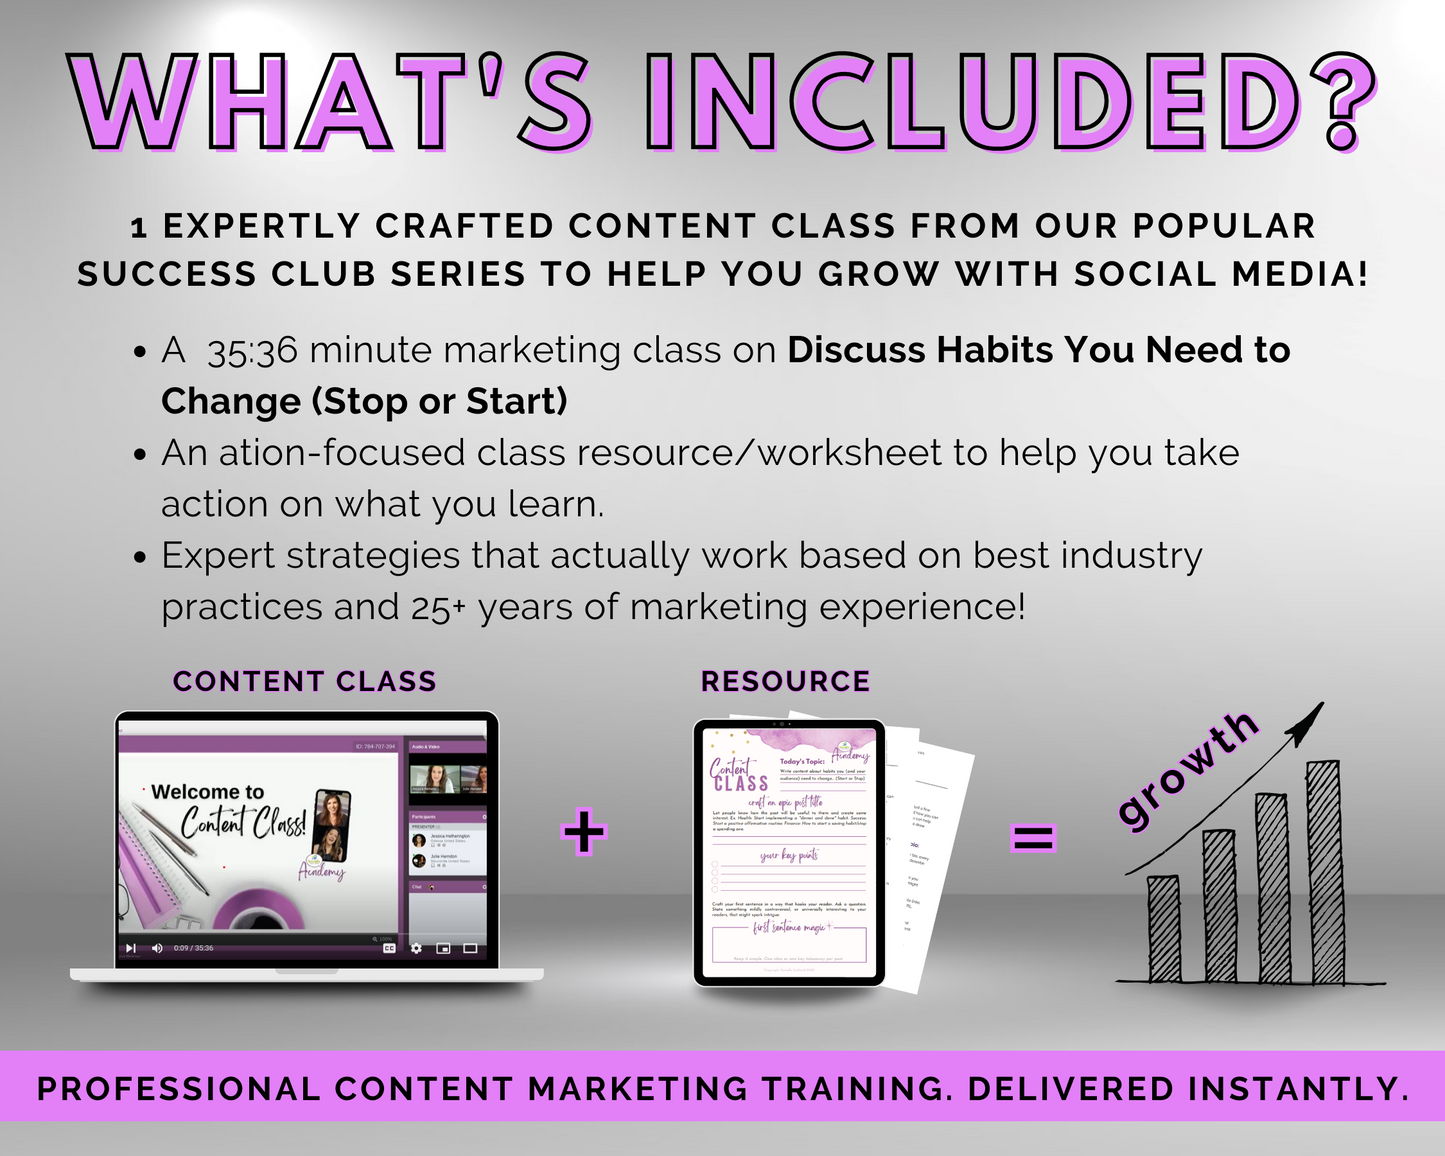 Content Class - Discuss Habits You Need to Change (Stop or Start) Masterclass